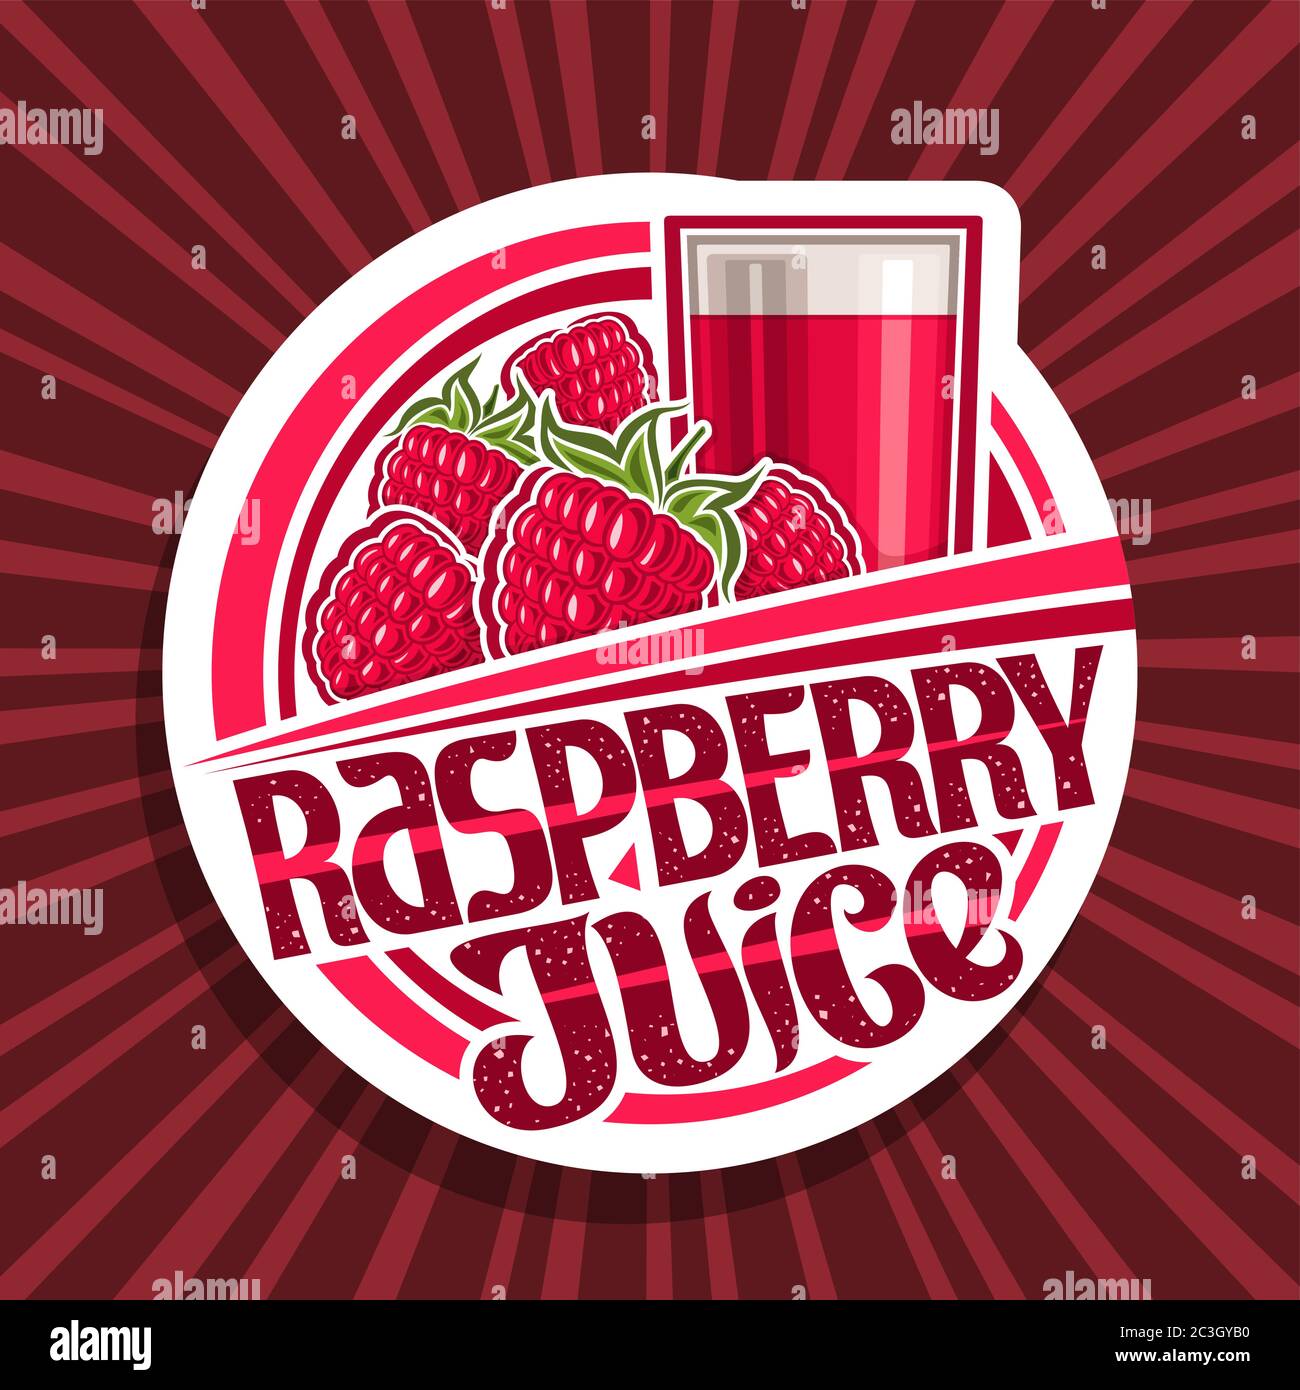 Vector logo for Raspberry Juice, decorative cut paper label with illustration of berry drink in glass, pile of cartoon raspberries, fruit concept with Stock Vector